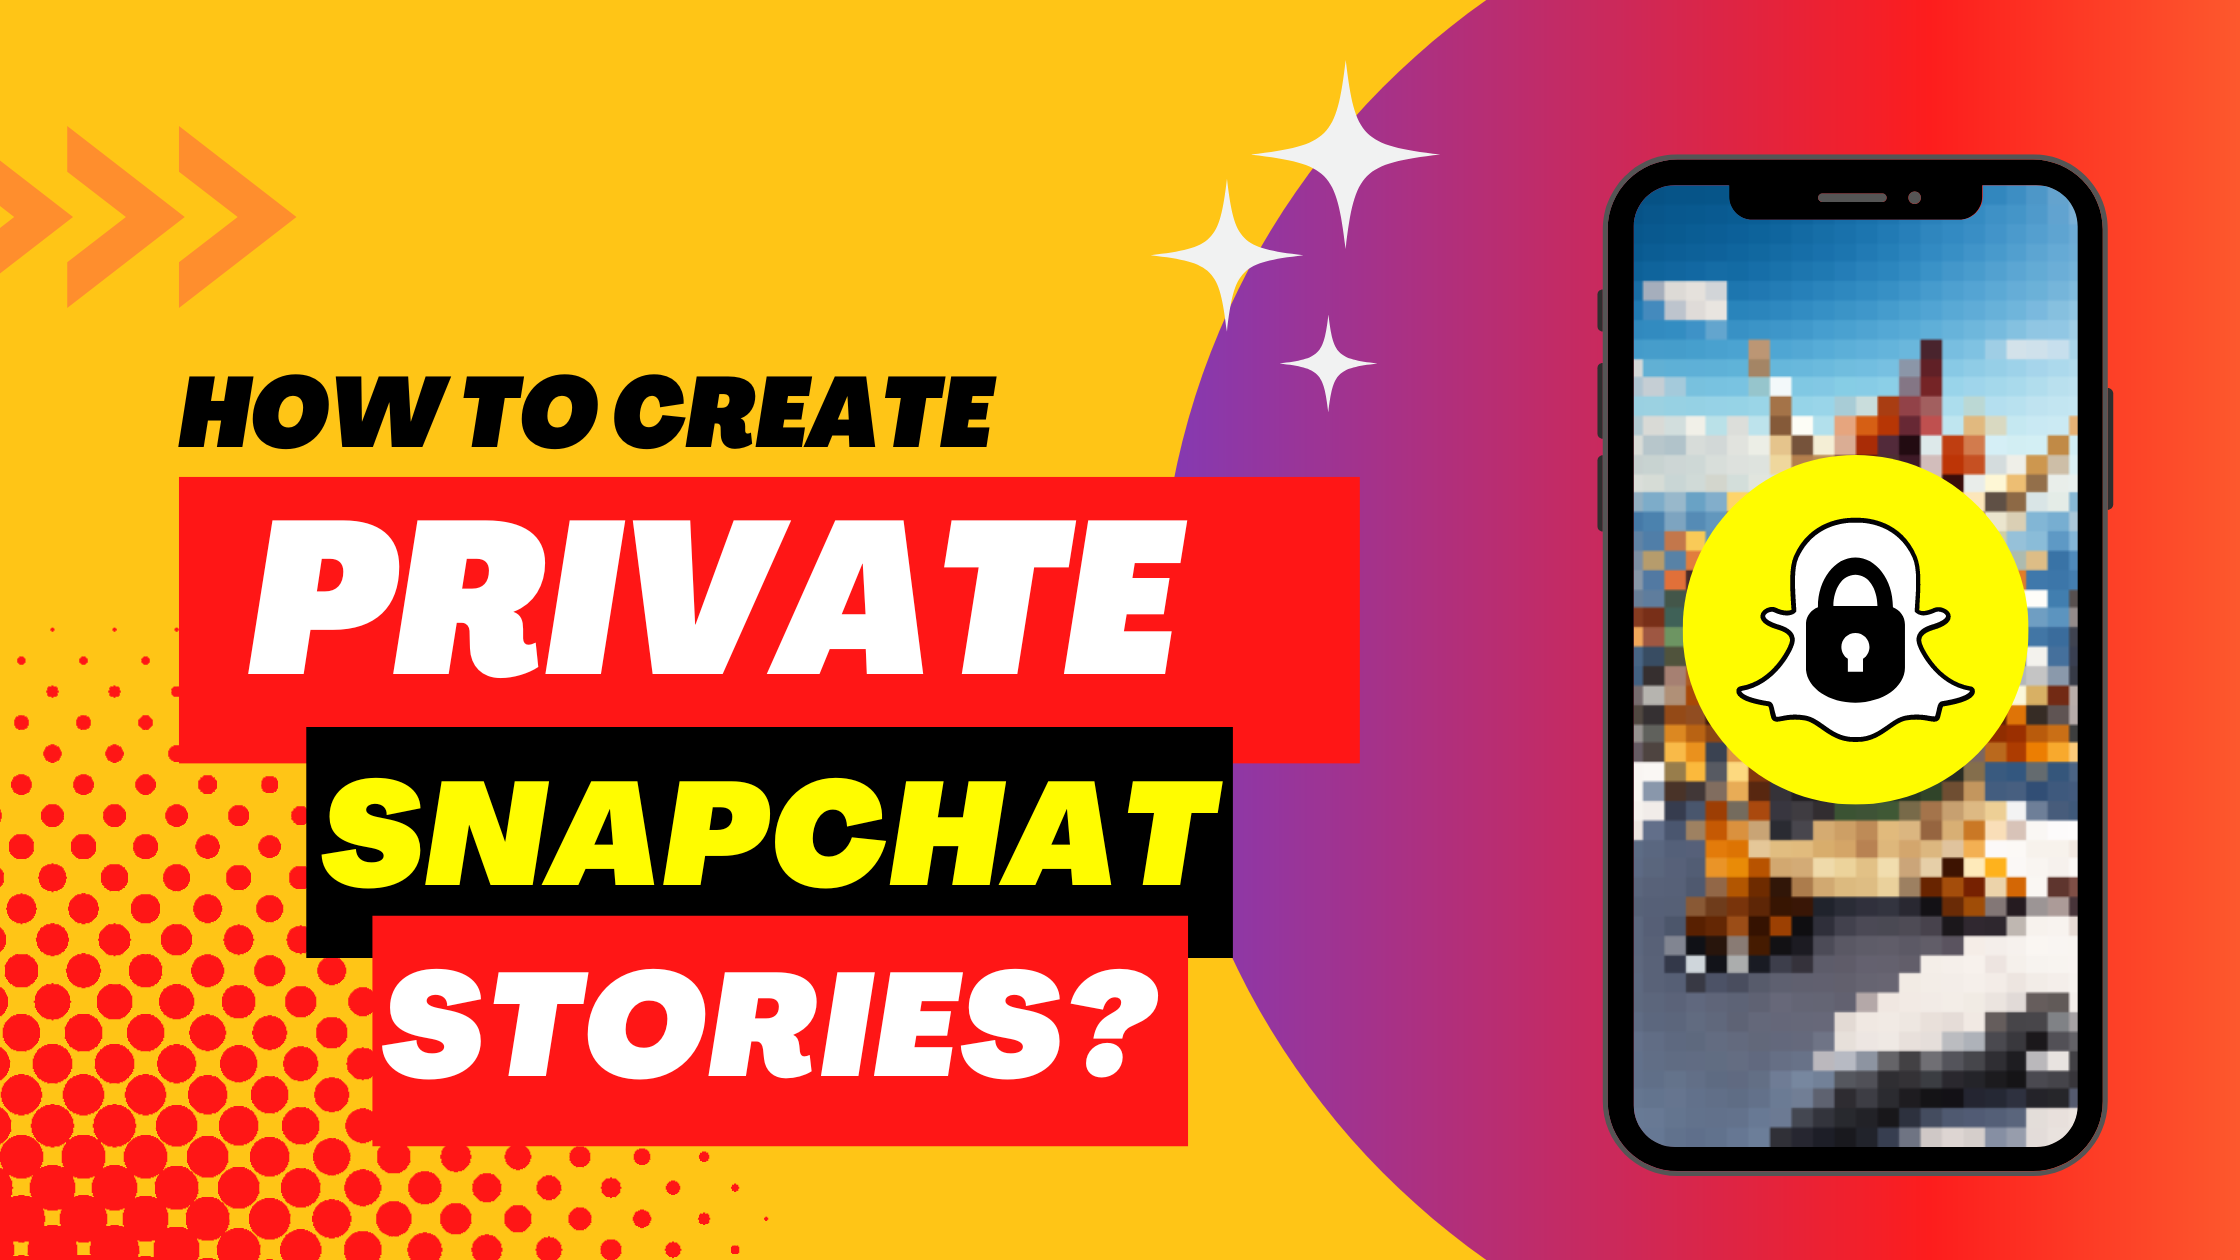 Remote.tools talks about creating private stories on Snapchat